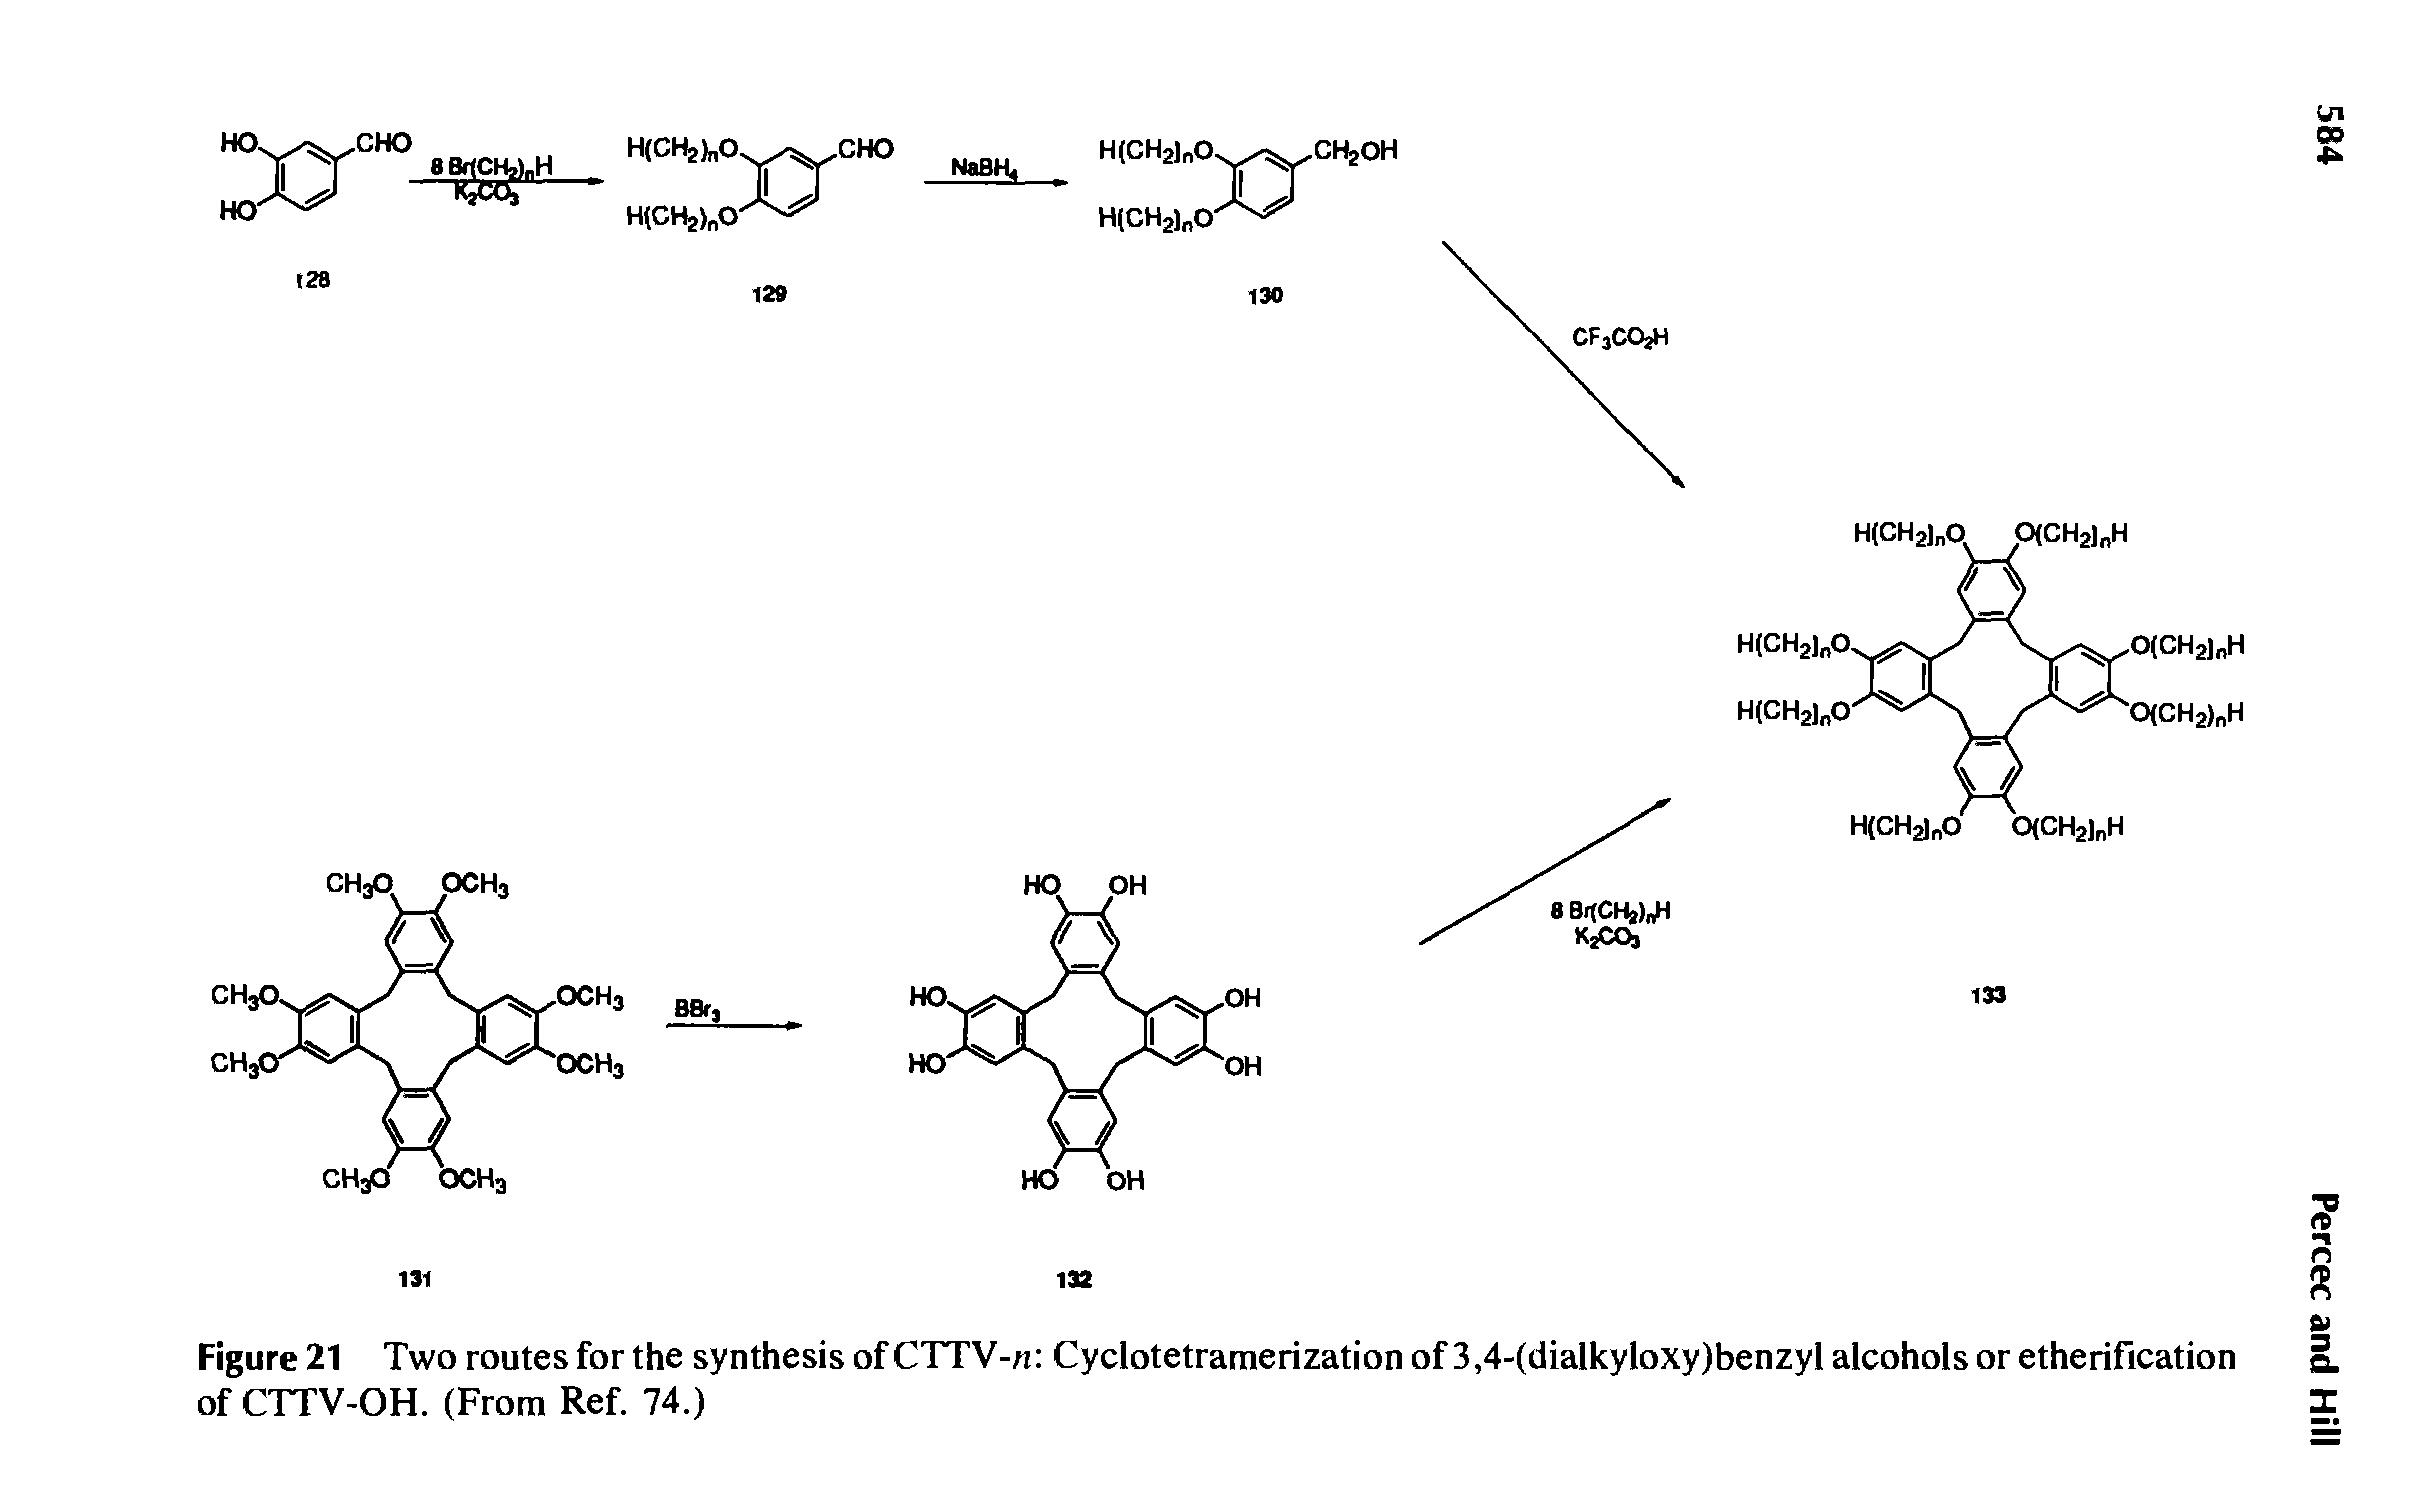 Figure 21 Two routes for the synthesis ofCTTV-n Cyclotetramerization of 3,4-(dialkyloxy)benzyl alcohols or etherification of CTTV-OH. (From Ref. 74.)...